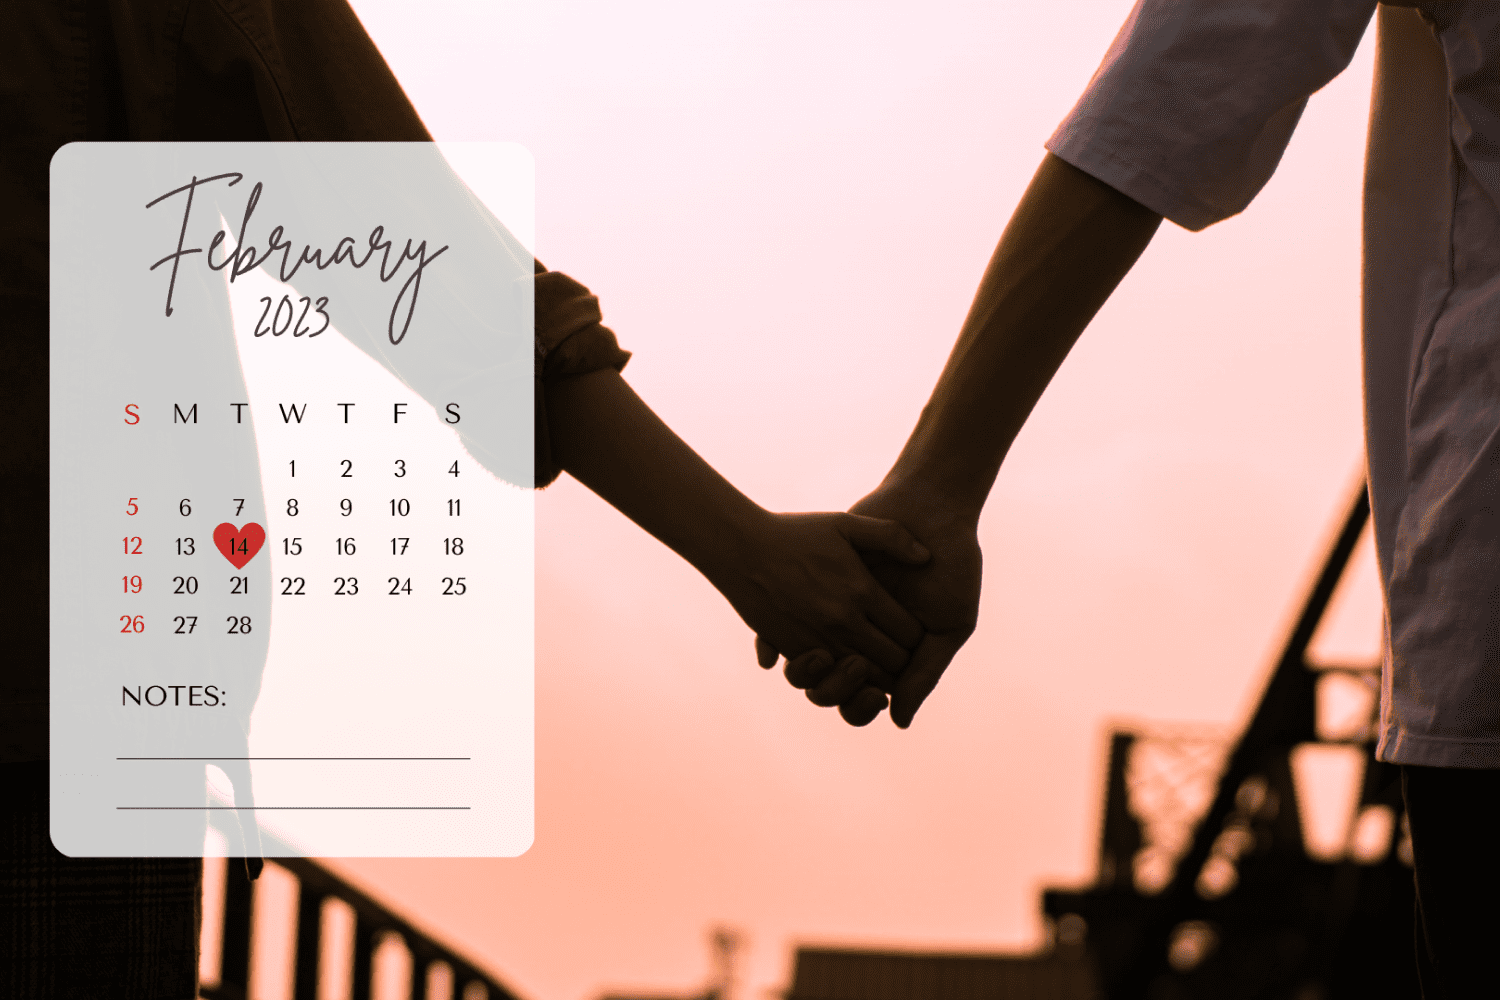 February calendar against the background of a couple holding hands.